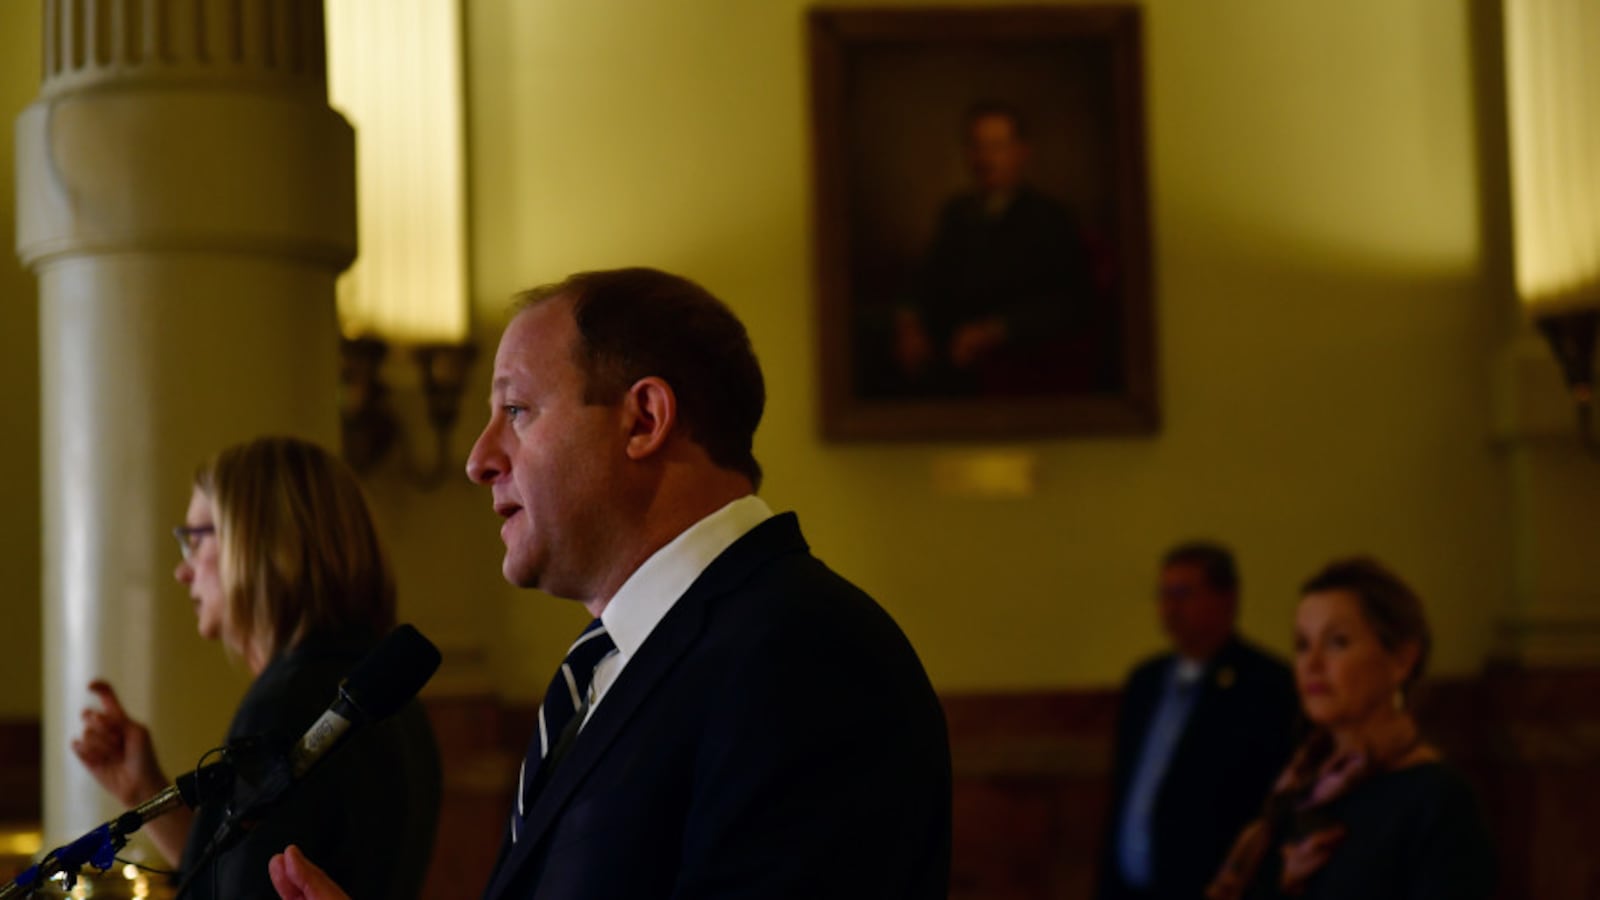 Gov. Jared Polis announced a series of orders to give more financial support to small businesses, homeowners, renters, and taxpayers as the novel coronavirus puts a heavy strain on Colorado's economy.